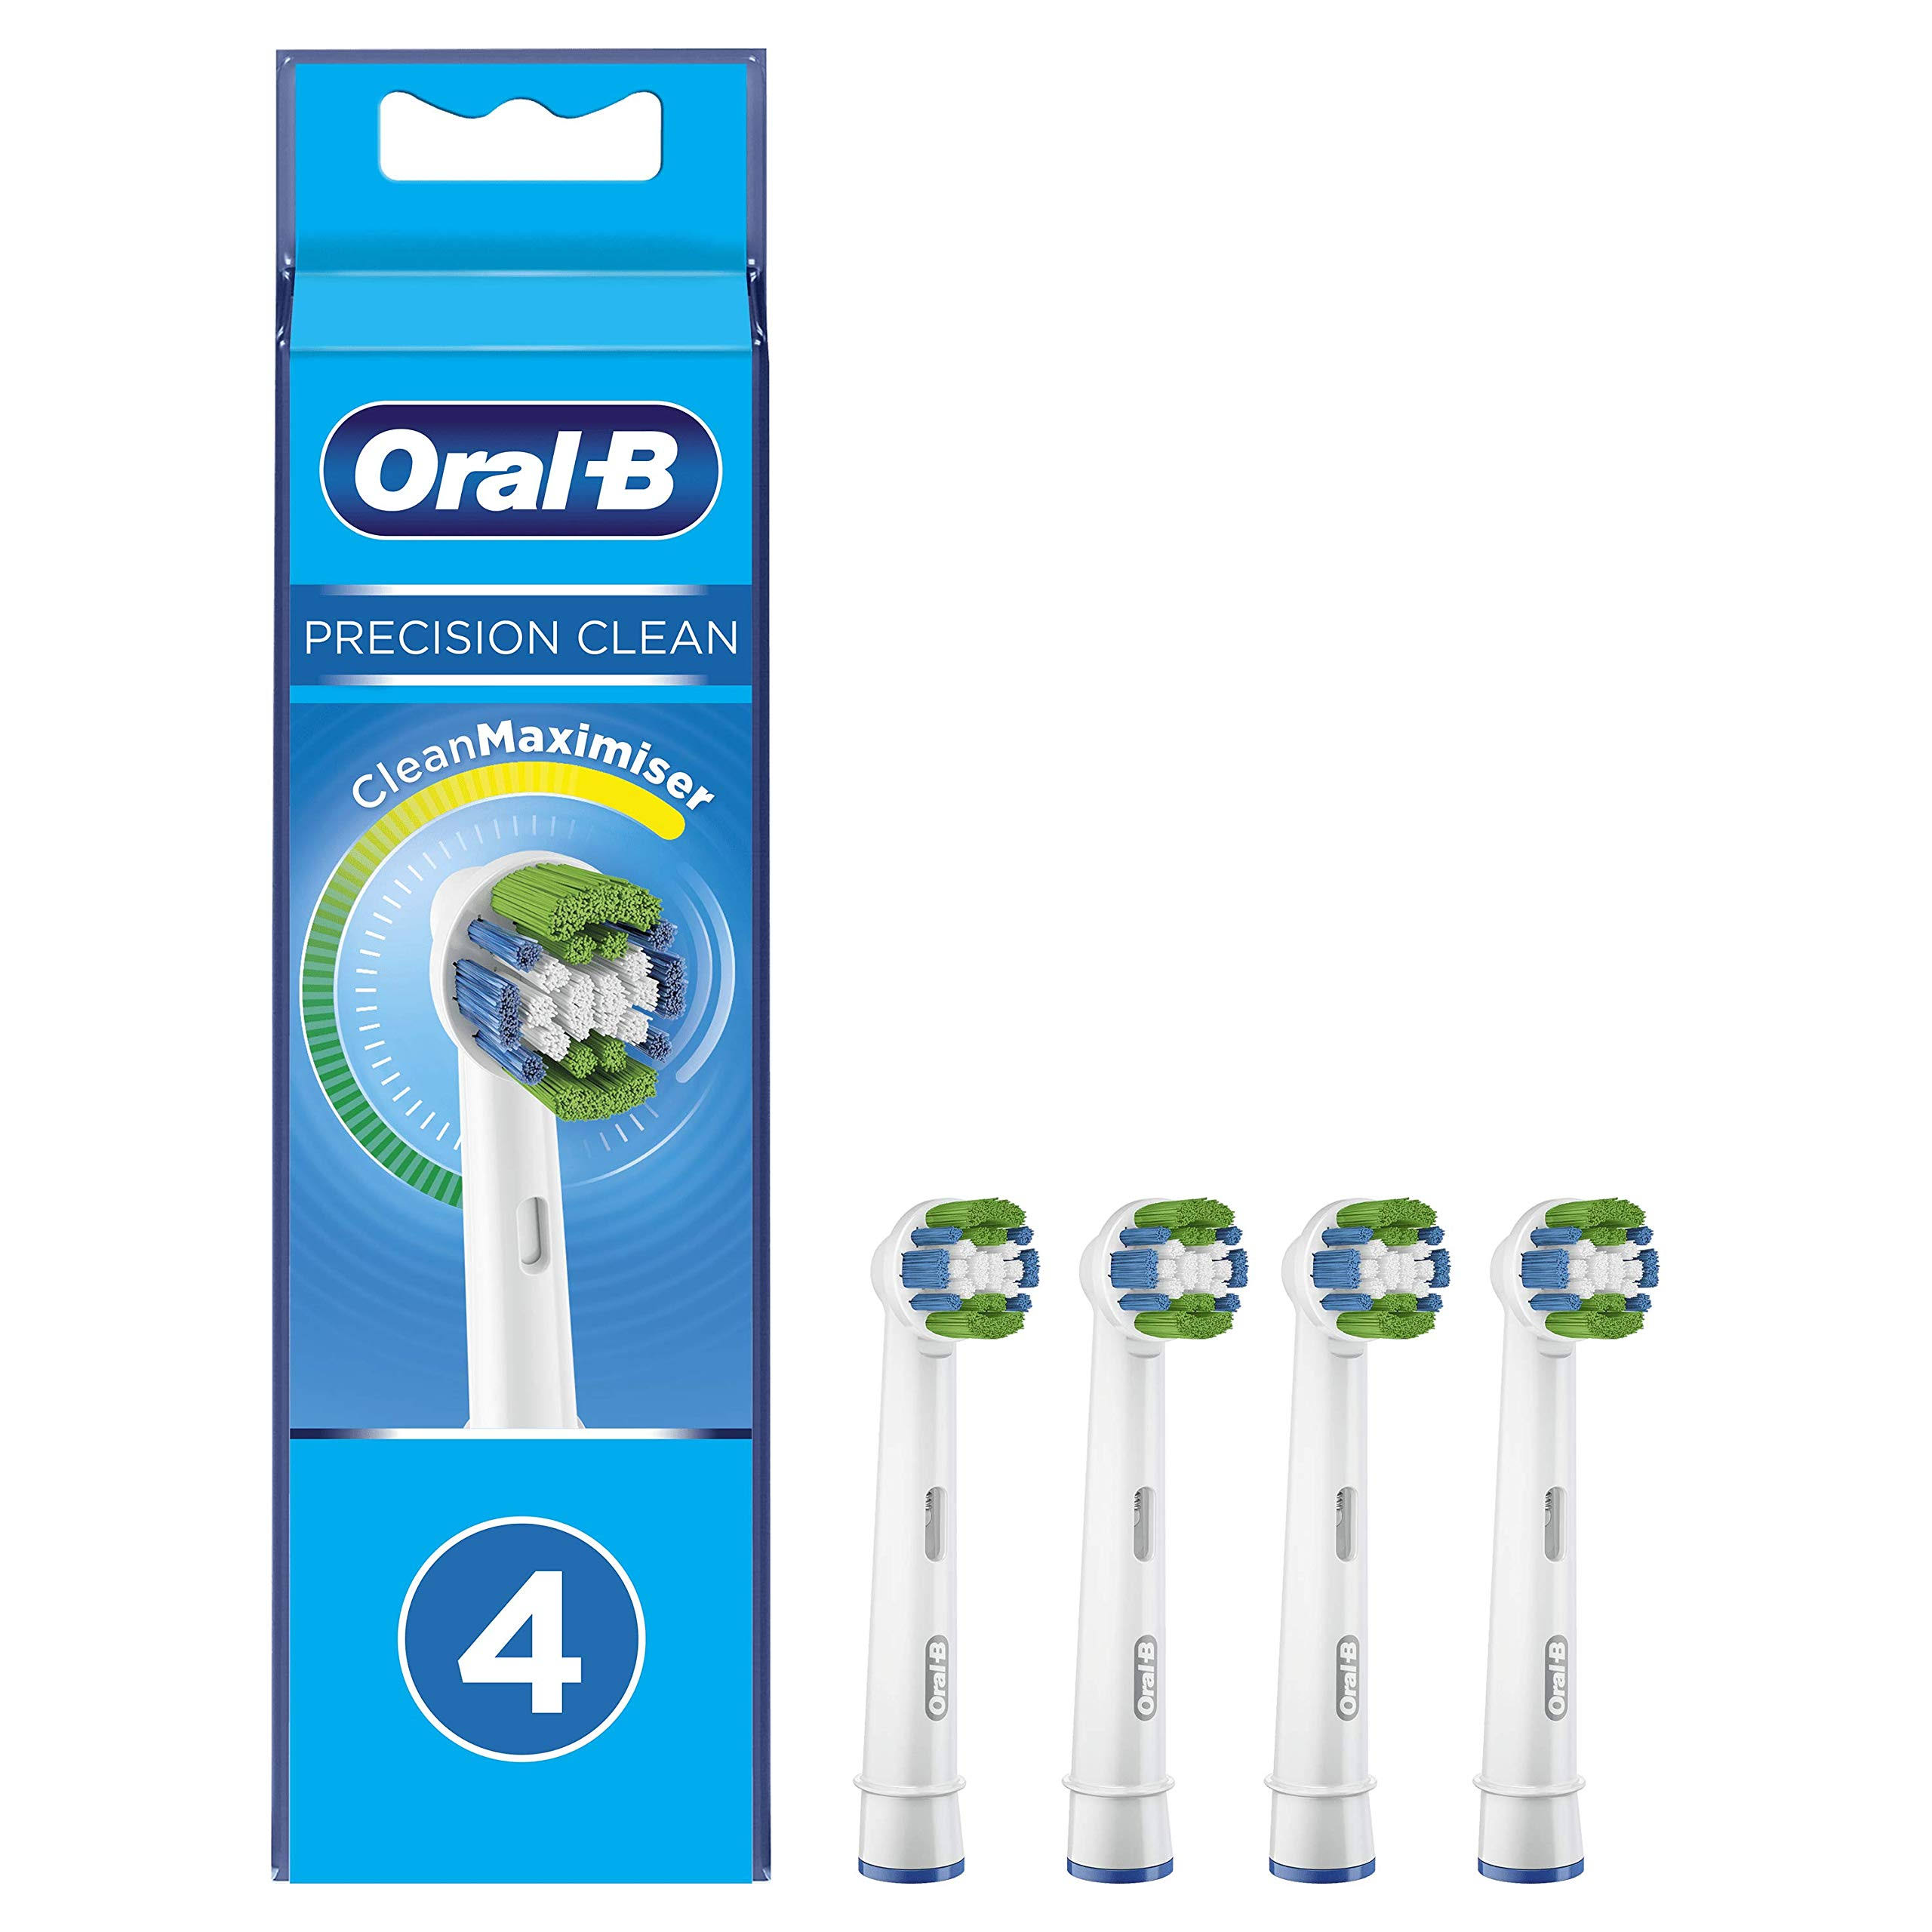 Oral-B Precision Clean Replacement Toothbrush Heads 4 Pack